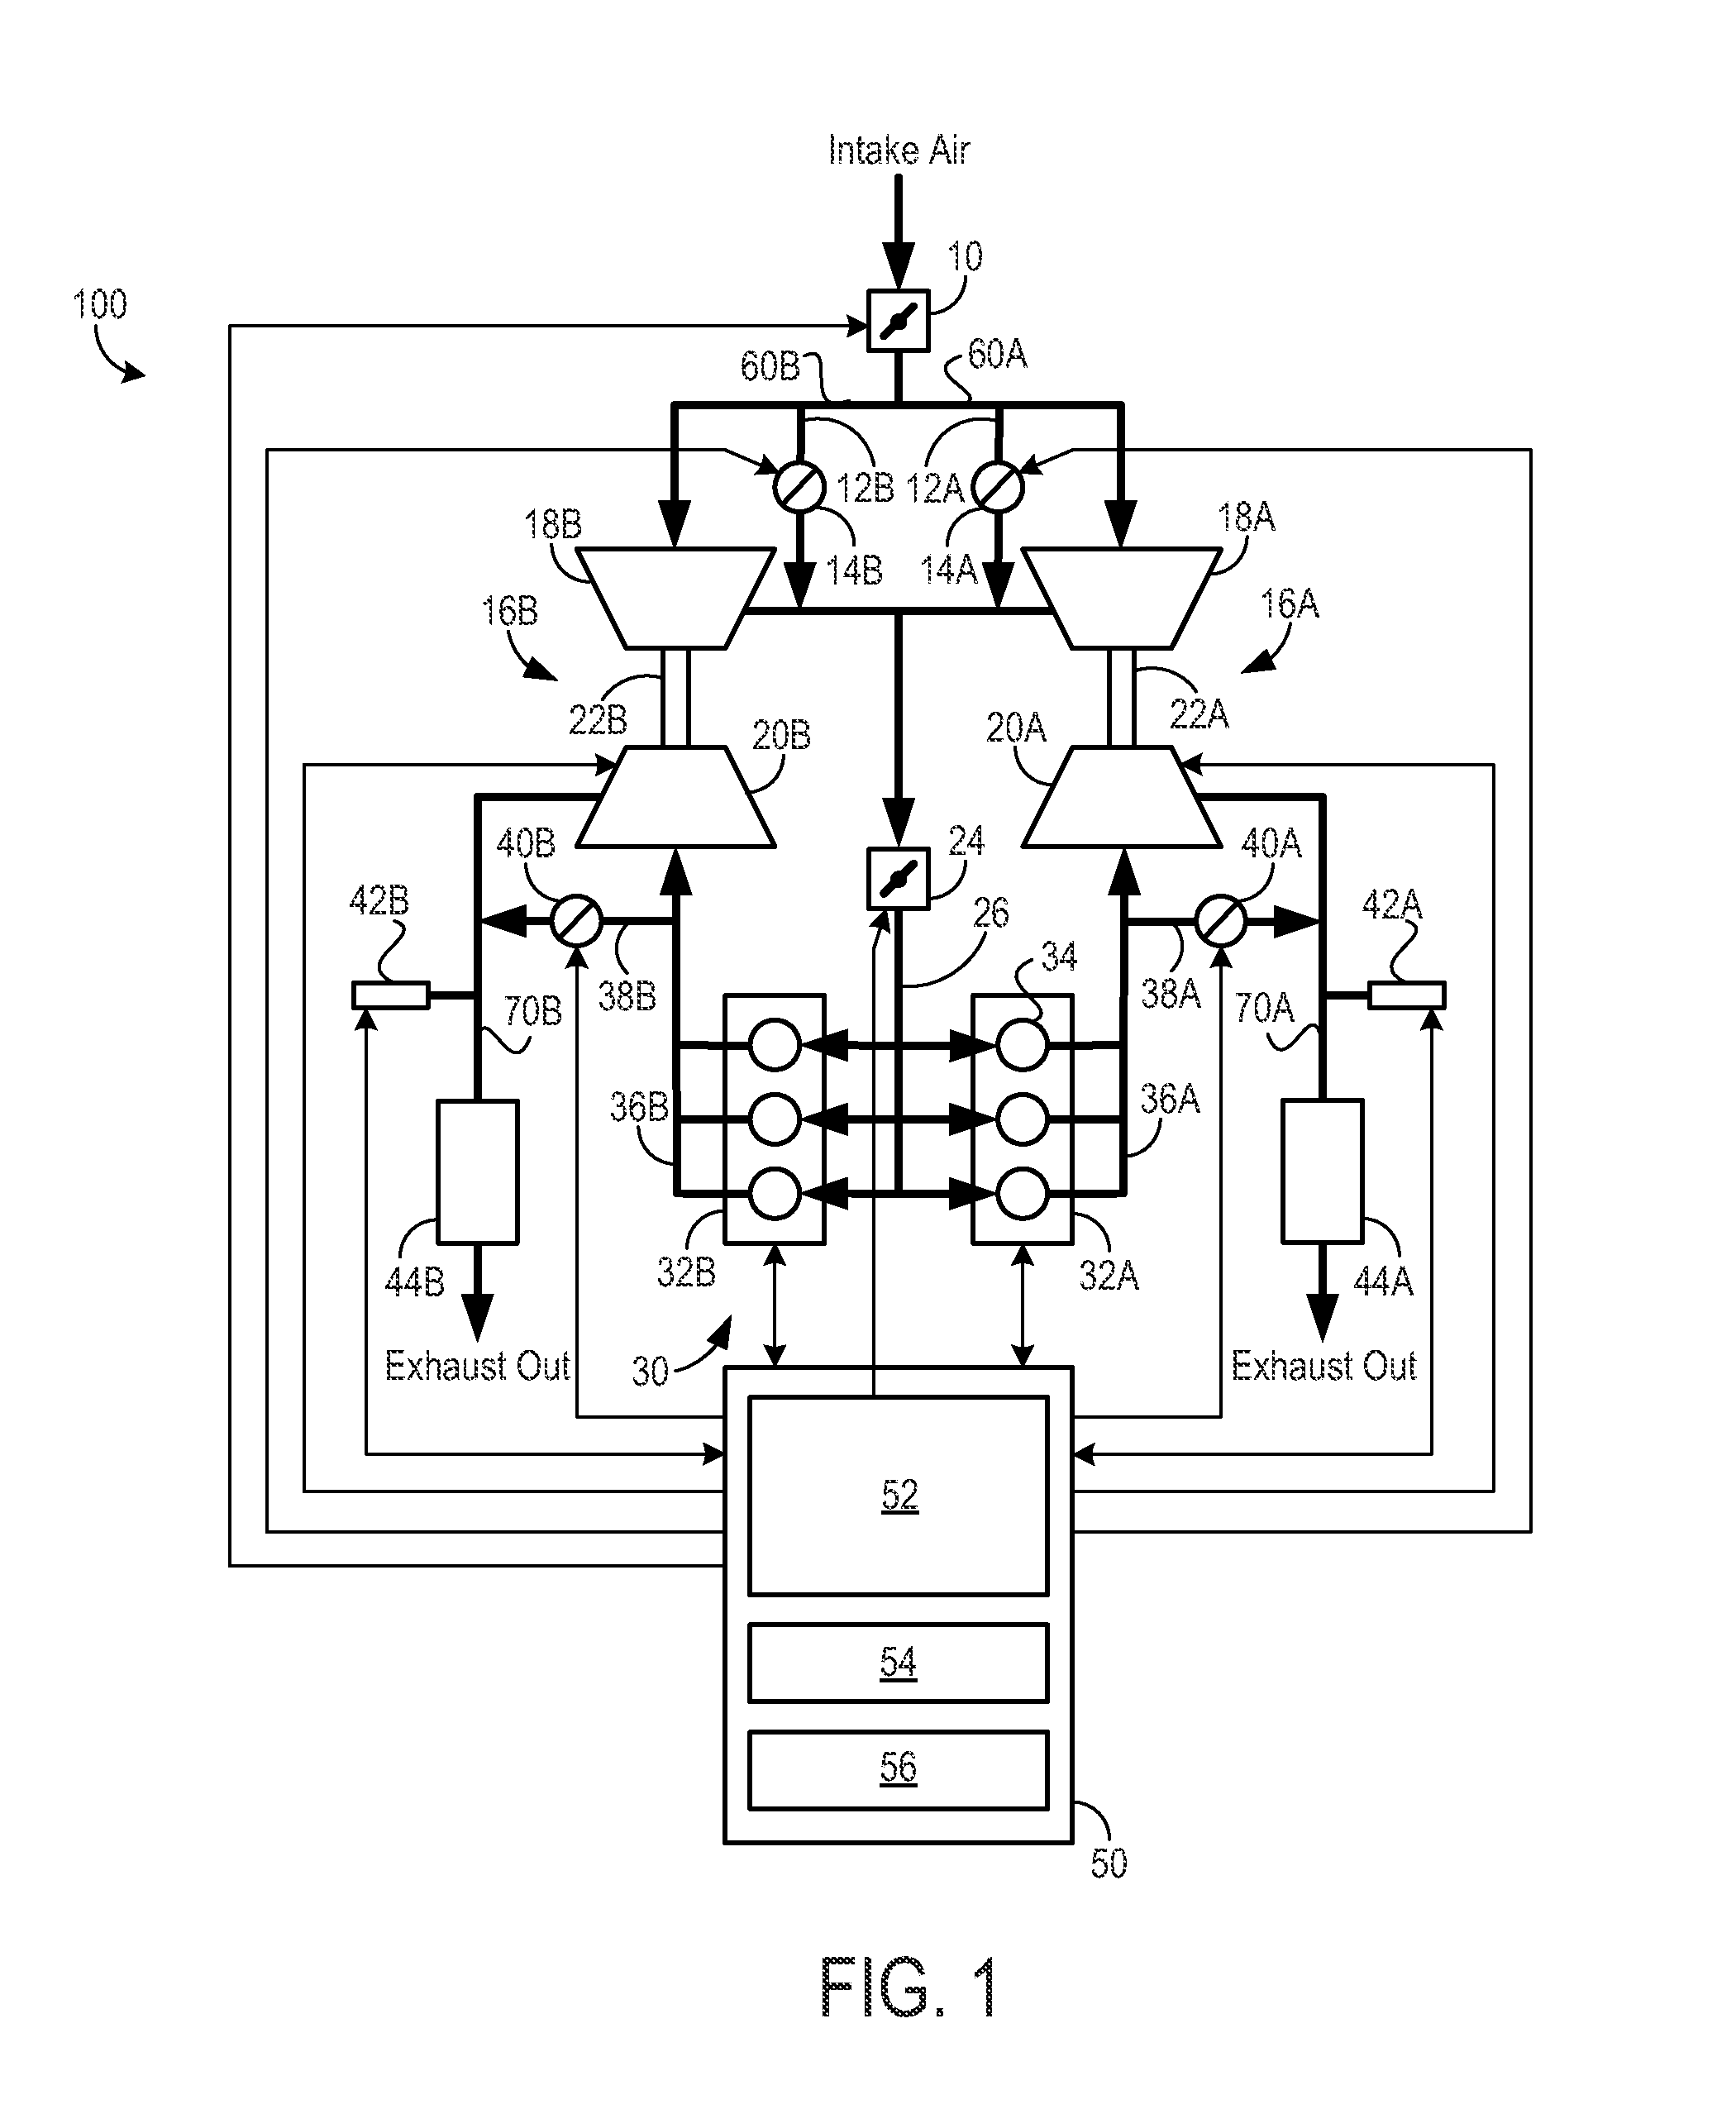 Approach for identifying and responding to an unresponsive wastegate in a twin turbocharged engine